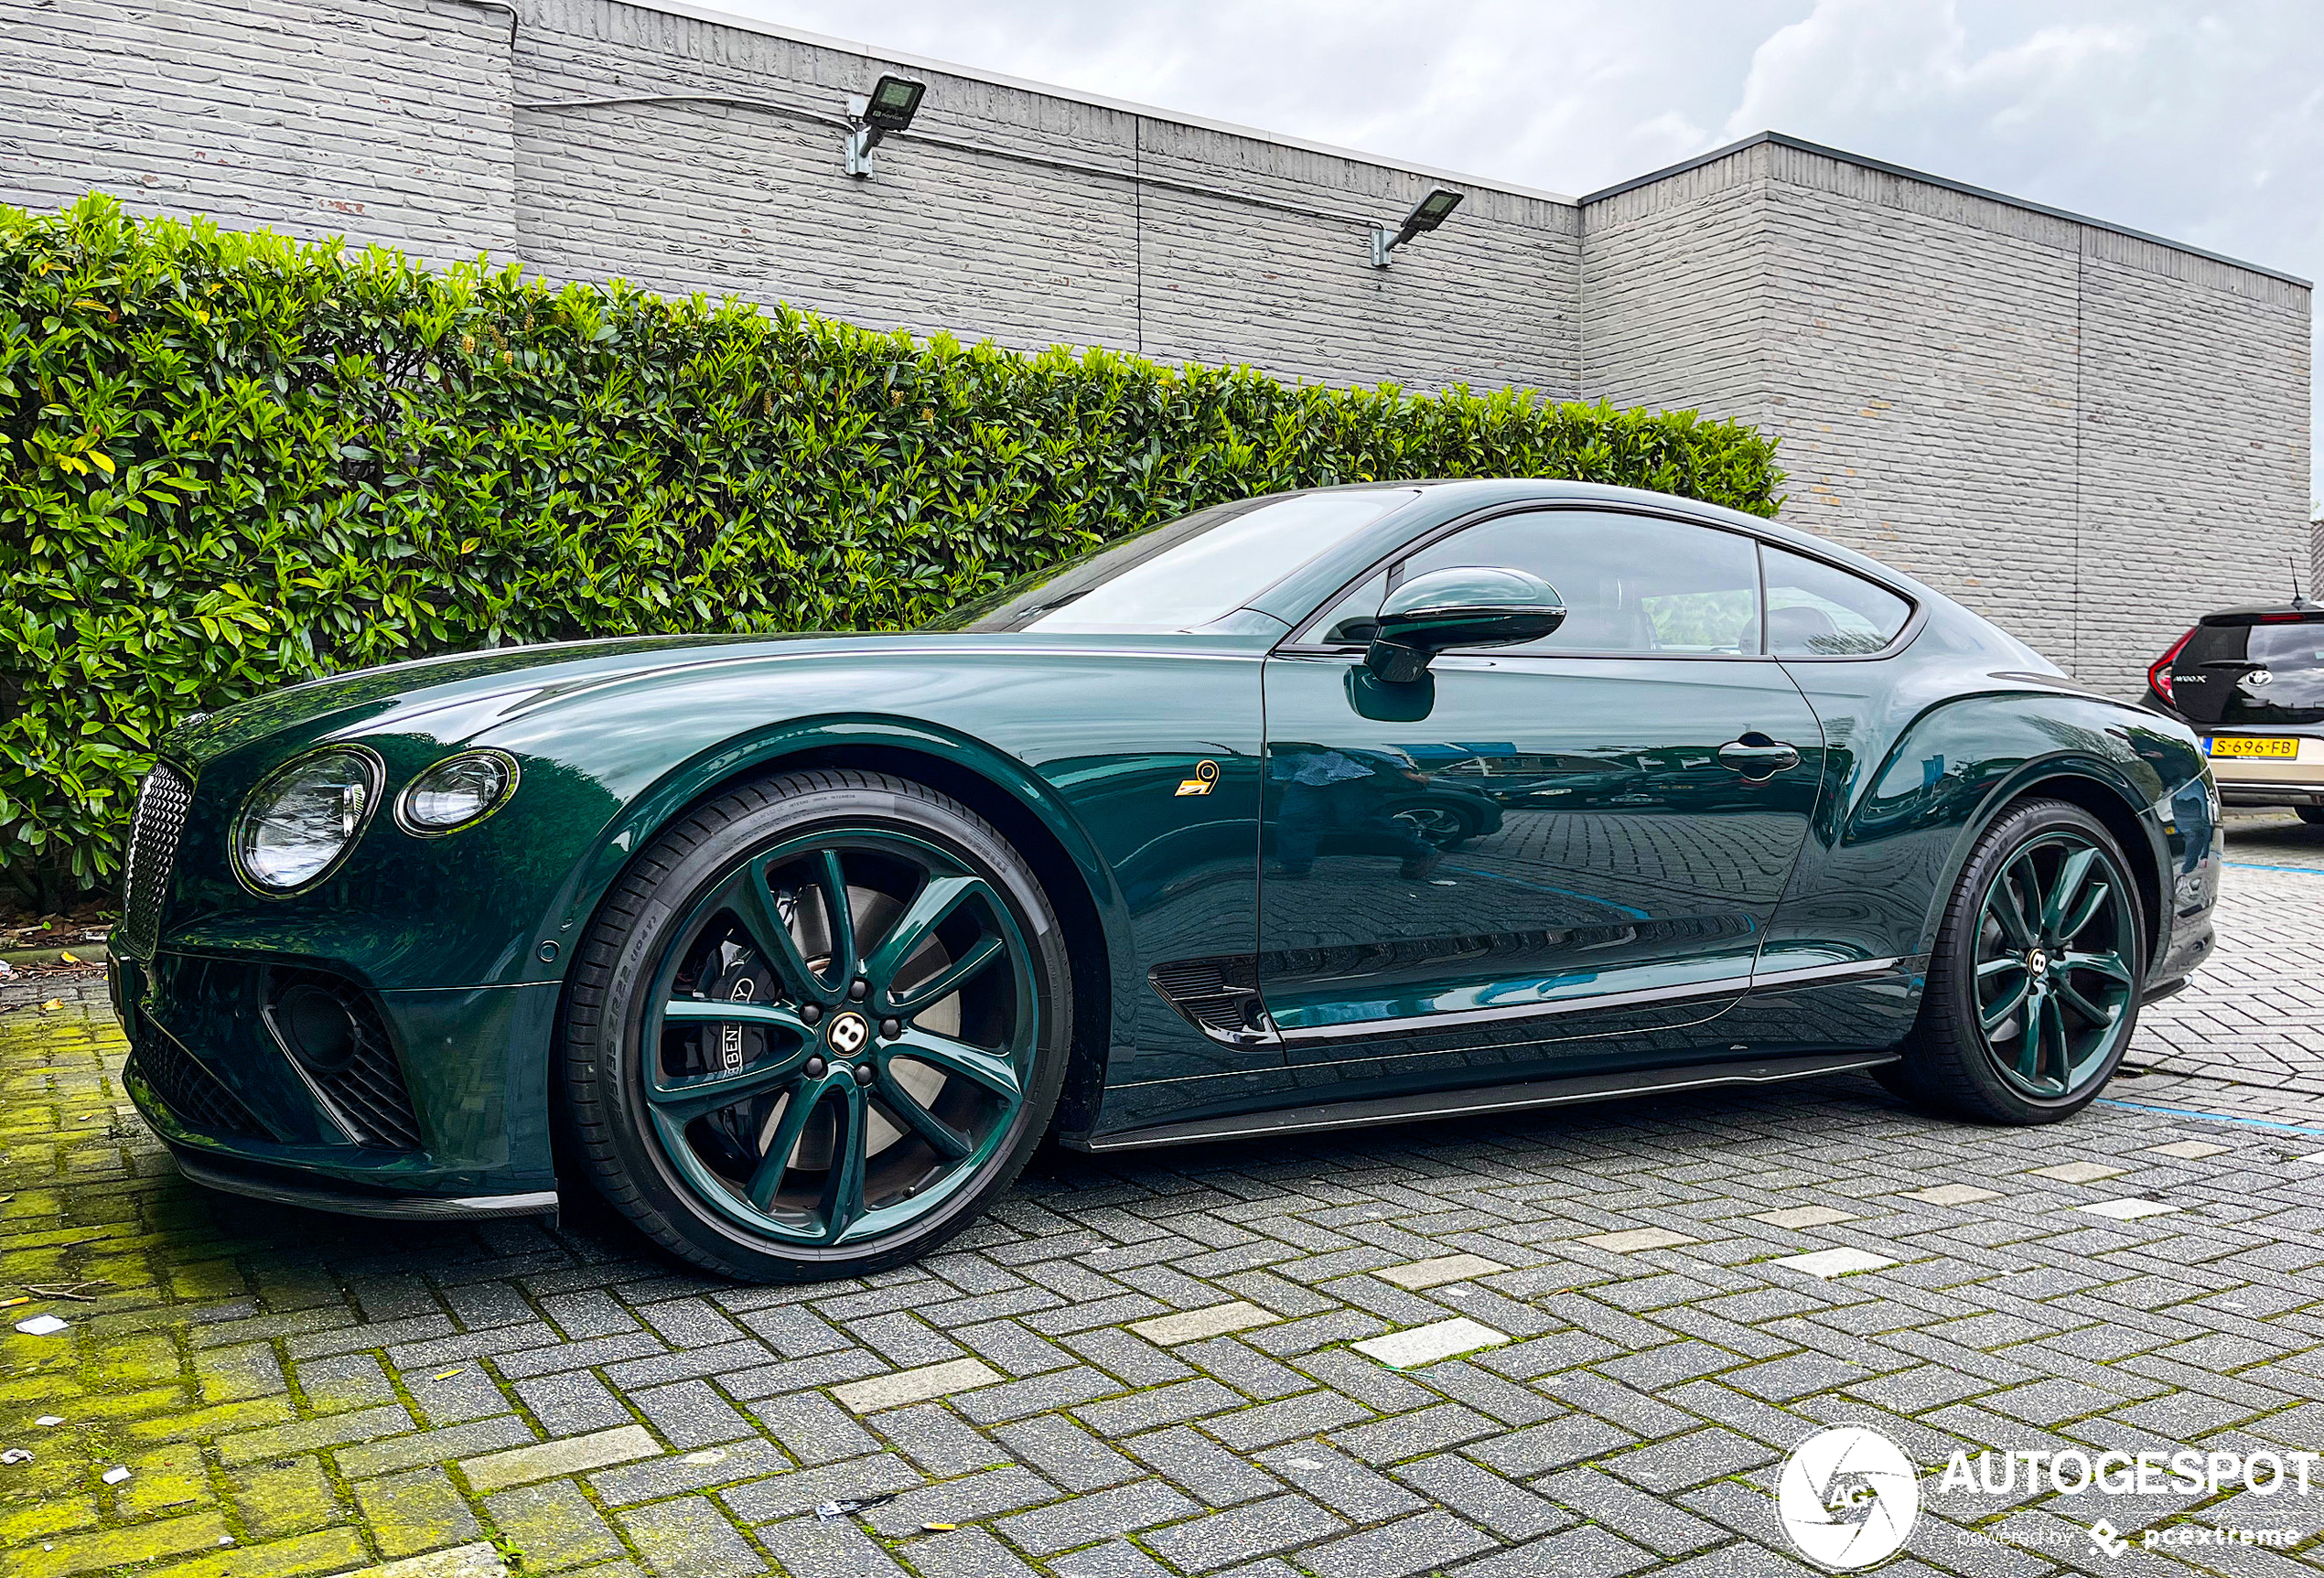 Beautiful bentley with body colored rims